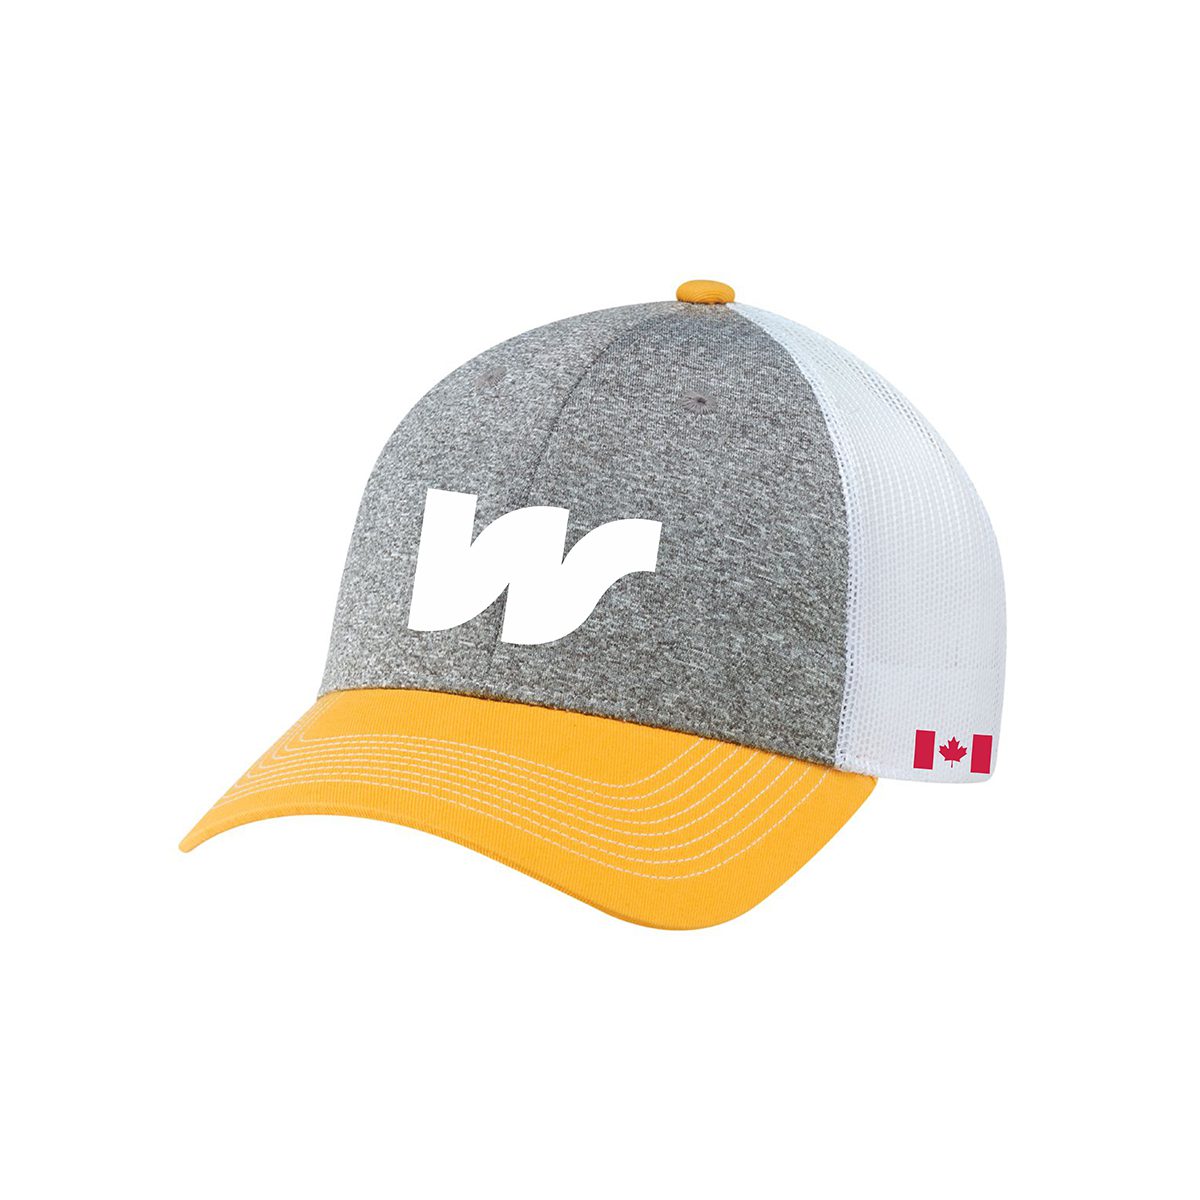 City-of-Welland-Merch-Store_V9-4G645M-Gold-Charcoal-White-with--White-W-LOGO-Centre-of-Hat